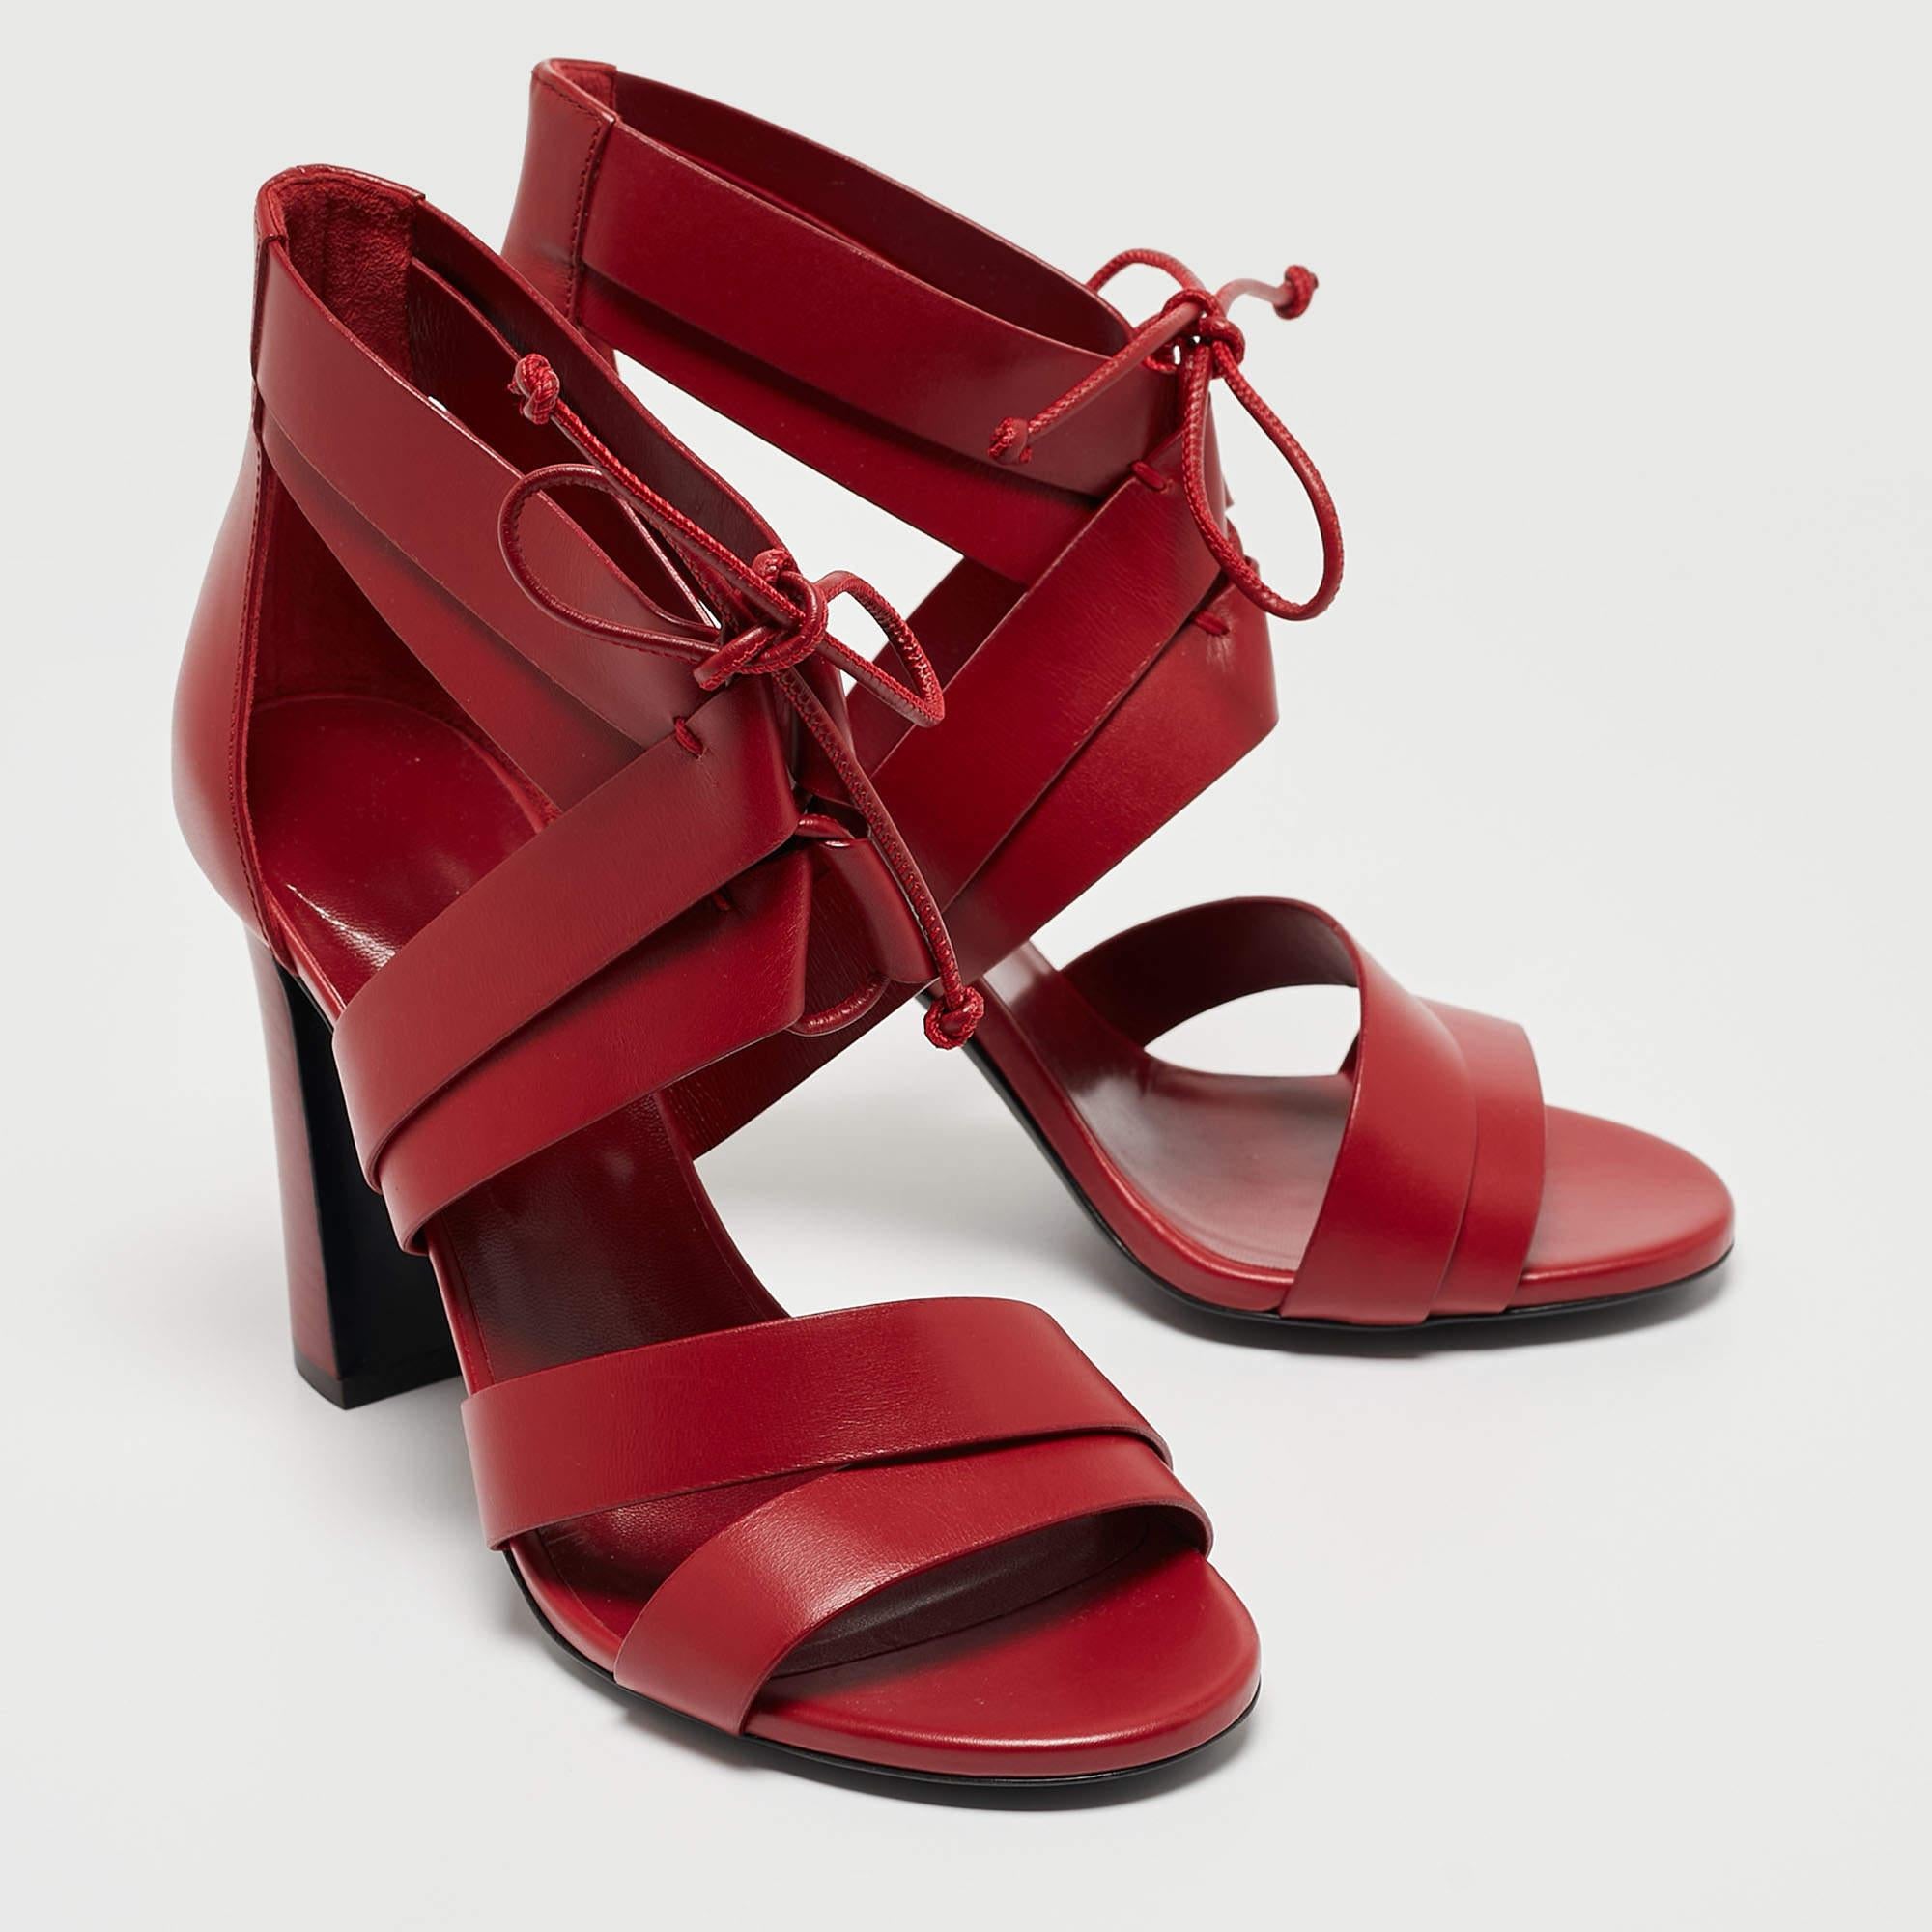 Hermes Dark Red Leather Ankle Strap Sandals Size 38 In New Condition For Sale In Dubai, Al Qouz 2